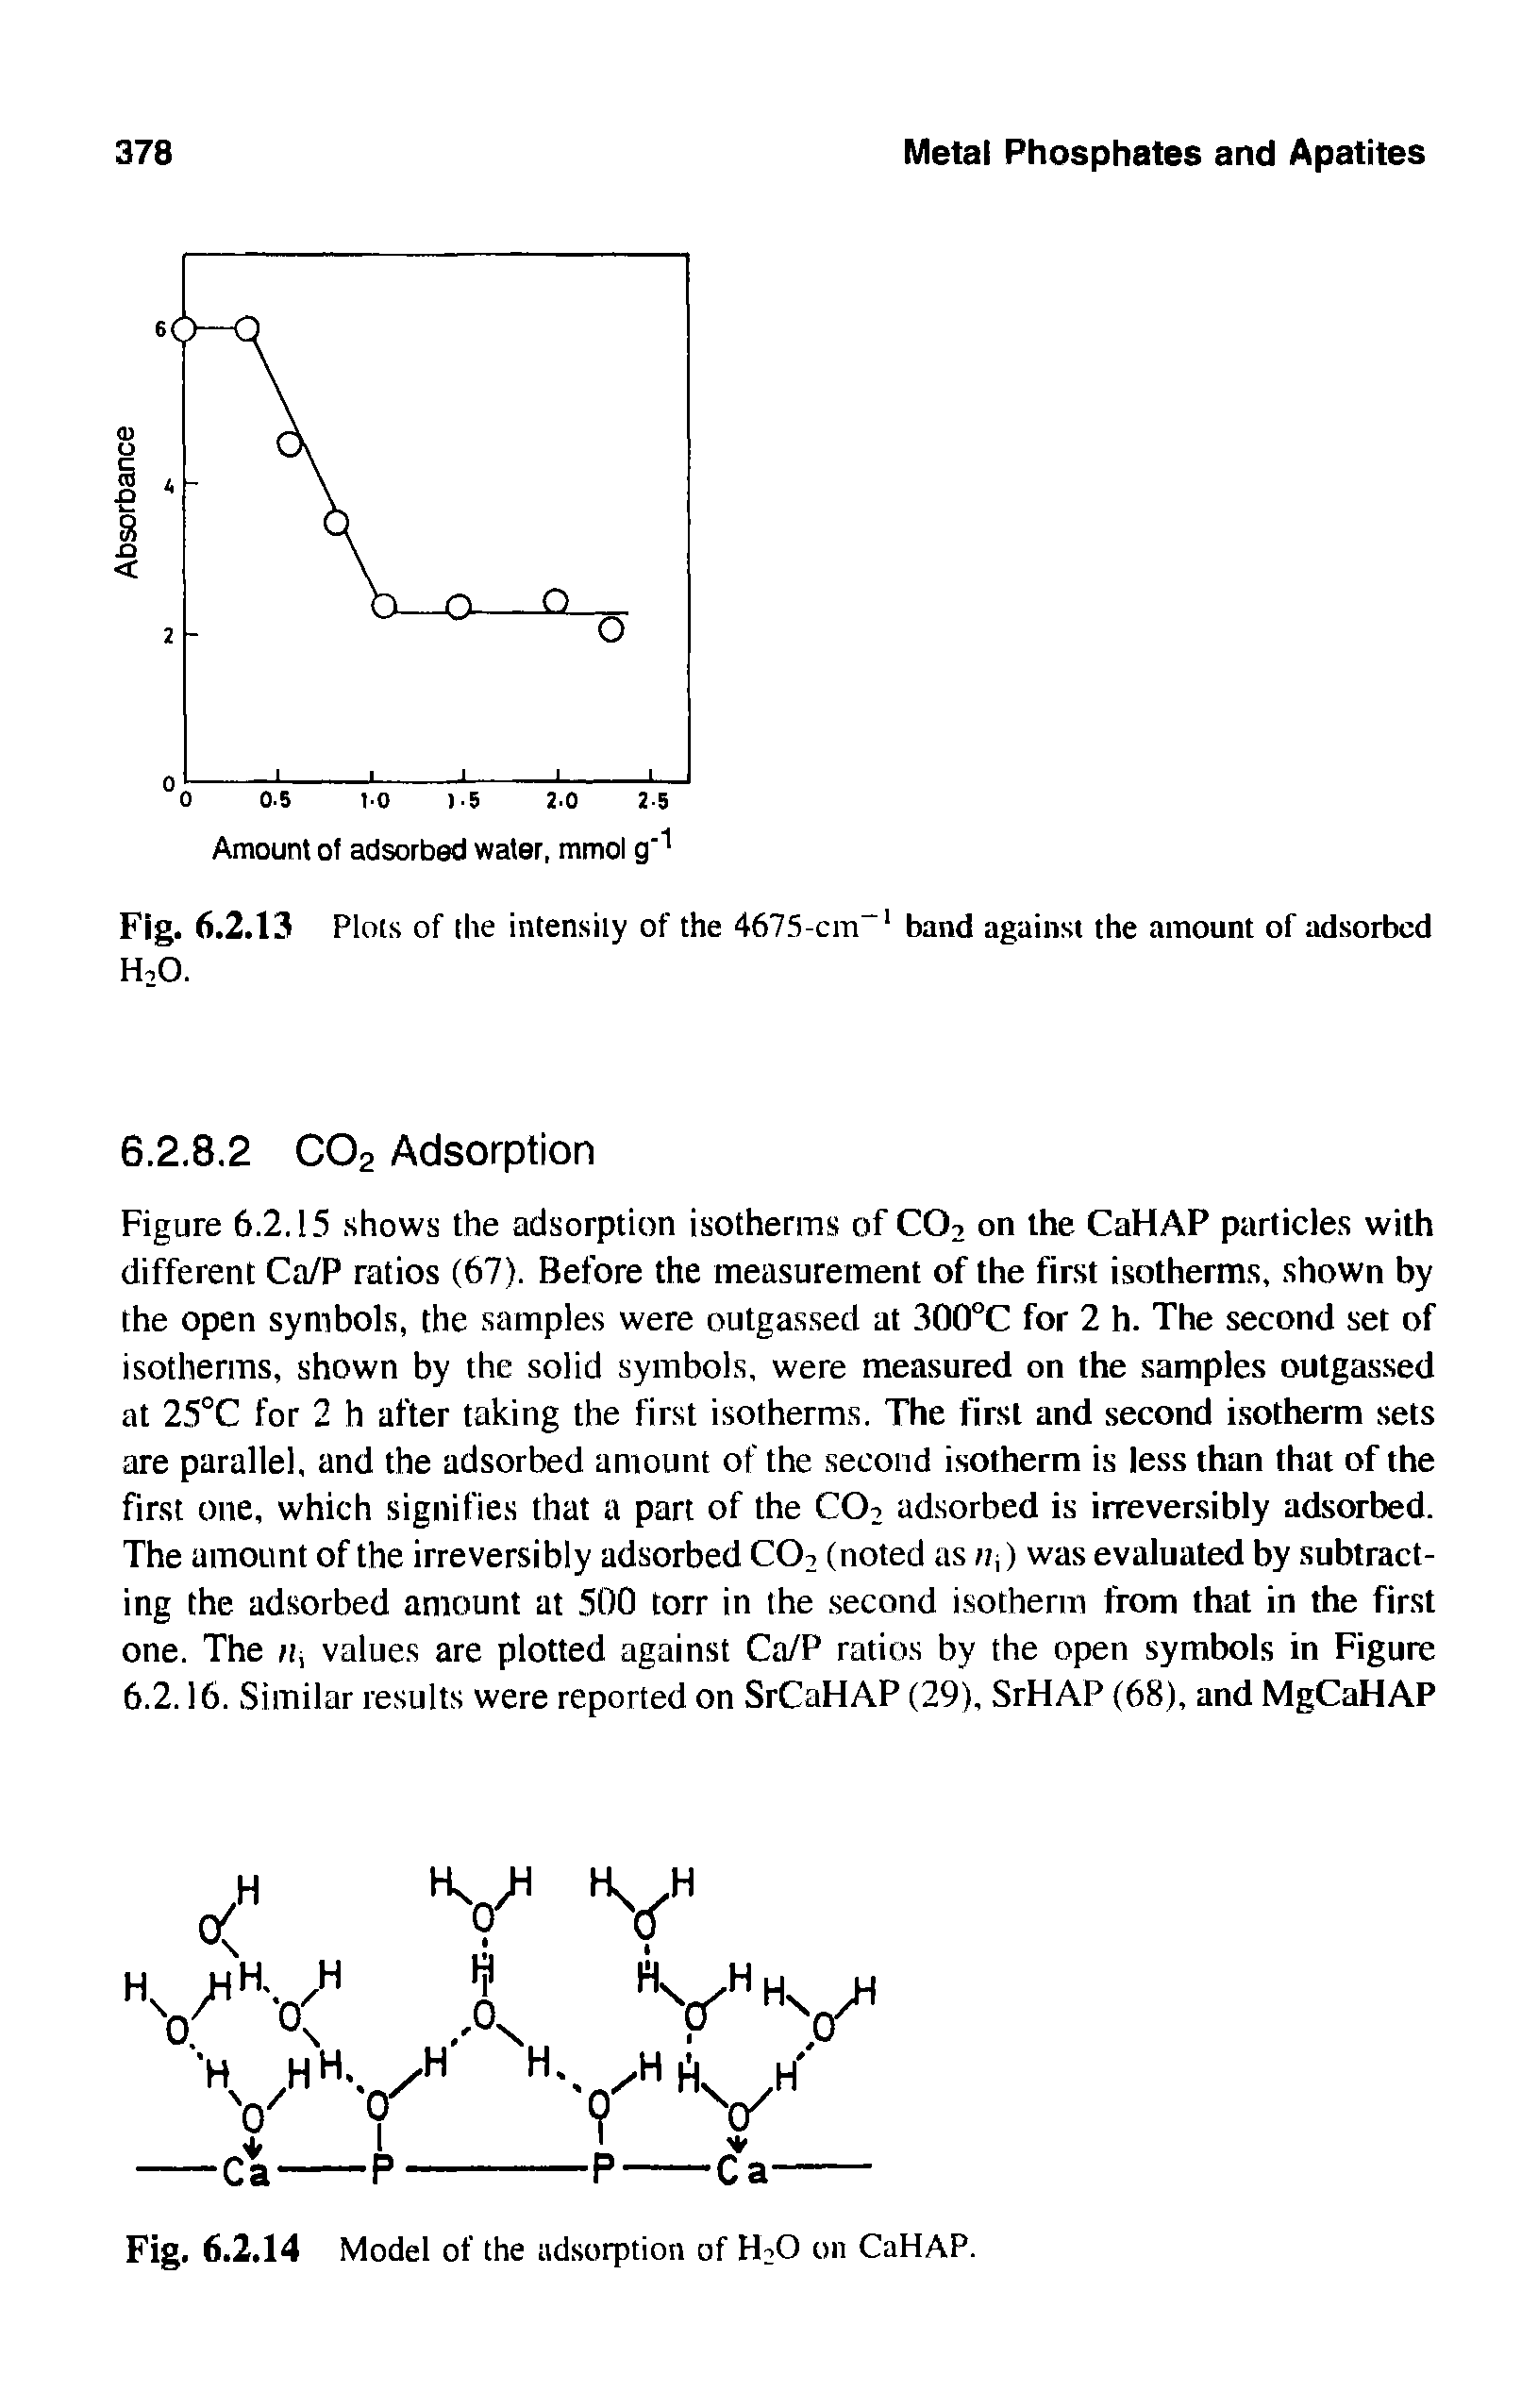 Figure 6.2,15 shows the adsorption isotherms of C02 on the CaHAP particles with different Ca/P ratios (67). Before the measurement of the first isotherms, shown by the open symbols, the samples were outgassed at 300°C for 2 h. The second set of isotherms, shown by the solid symbols, were measured on the samples outgassed at 25°C for 2 h after taking the first isotherms. The first and second isotherm sets are parallel, and the adsorbed amount of the second isotherm is less than that of the first one, which signifies that a part of the C02 adsorbed is irreversibly adsorbed. The amount of the irreversibly adsorbed C02 (noted as n,) was evaluated by subtracting the adsorbed amount at 500 torr in the second isotherm from that in the first one. The values are plotted against Ca/P ratios by the open symbols in Figure 6.2.16. Similar results were reported on SrCaHAP (29), SrHAP (68), and MgCaHAP...